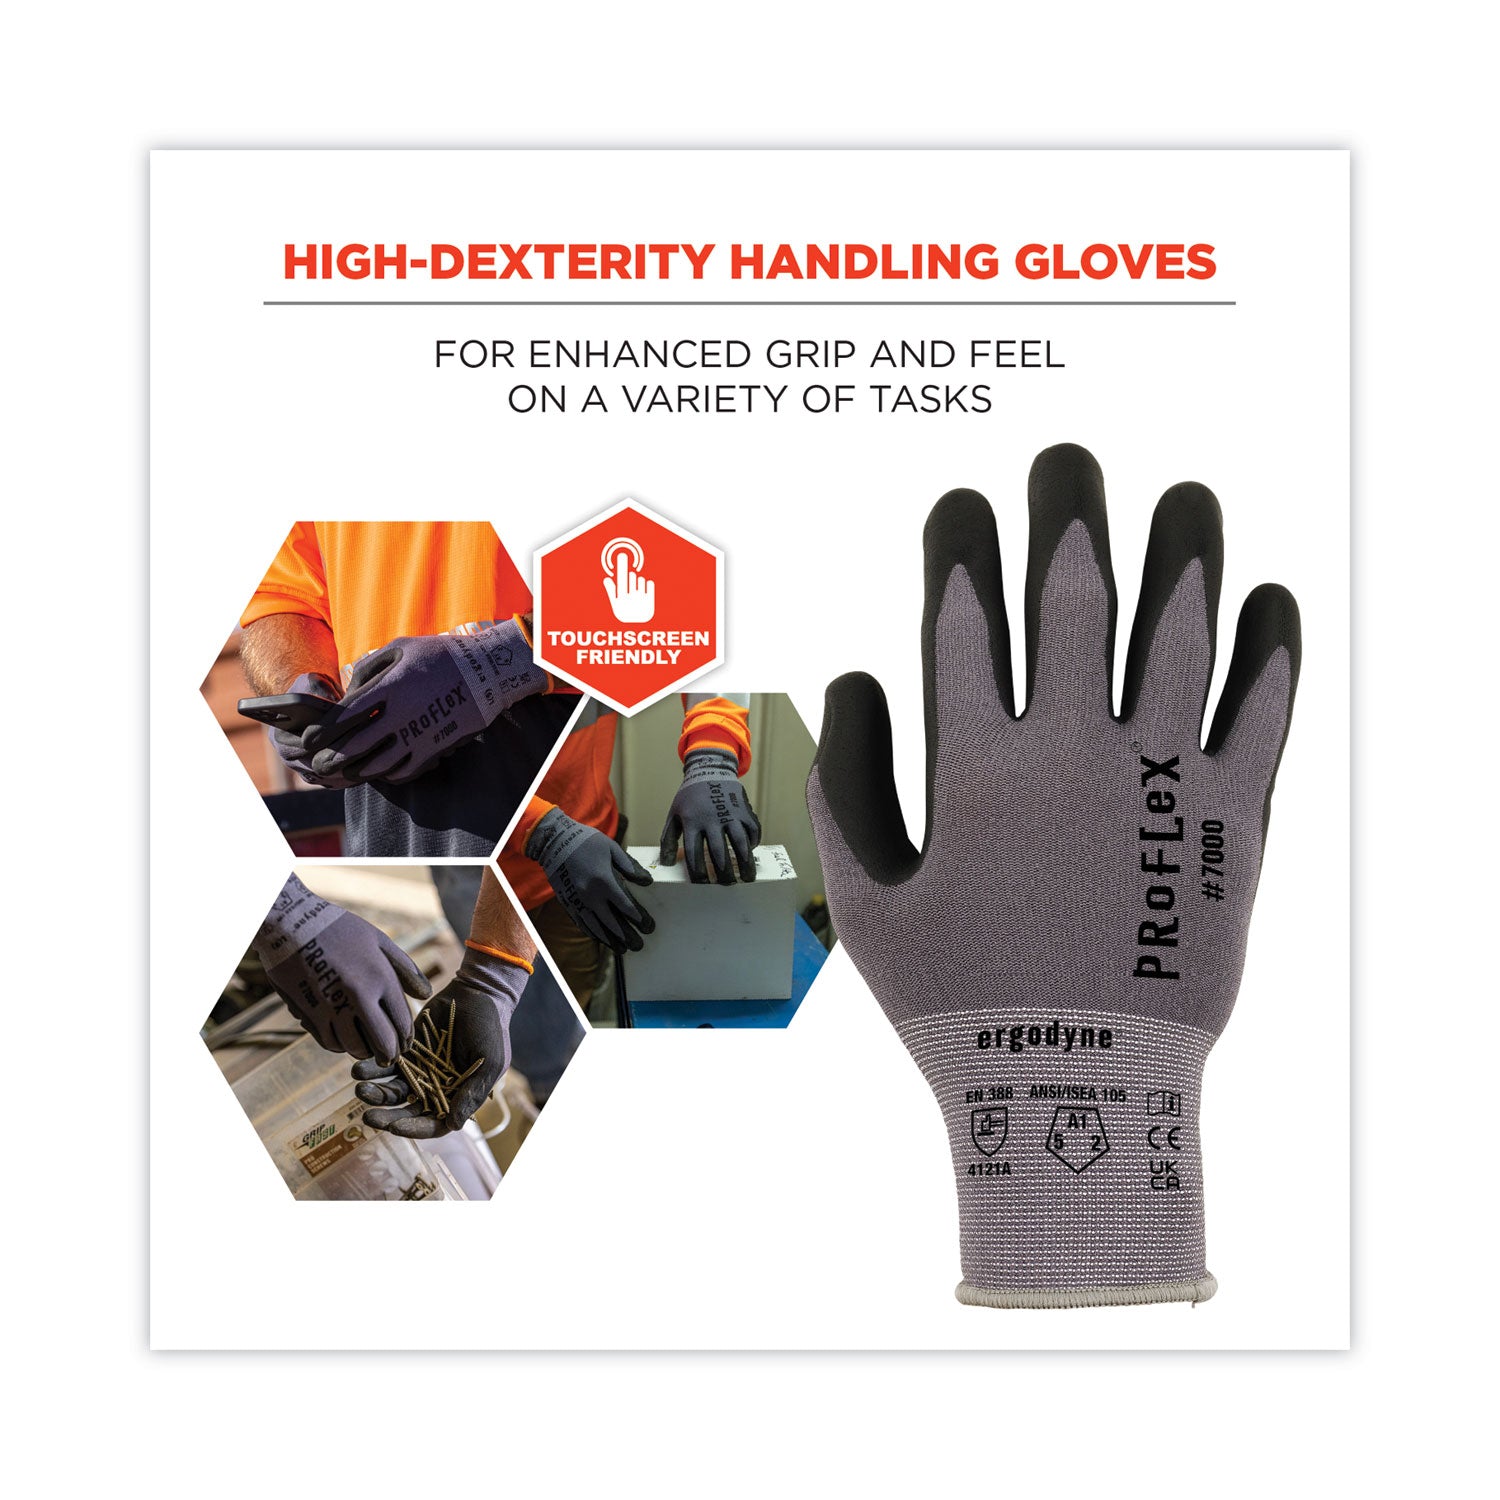 proflex-7000-nitrile-coated-gloves-microfoam-palm-gray-large-pair-ships-in-1-3-business-days_ego10374 - 2